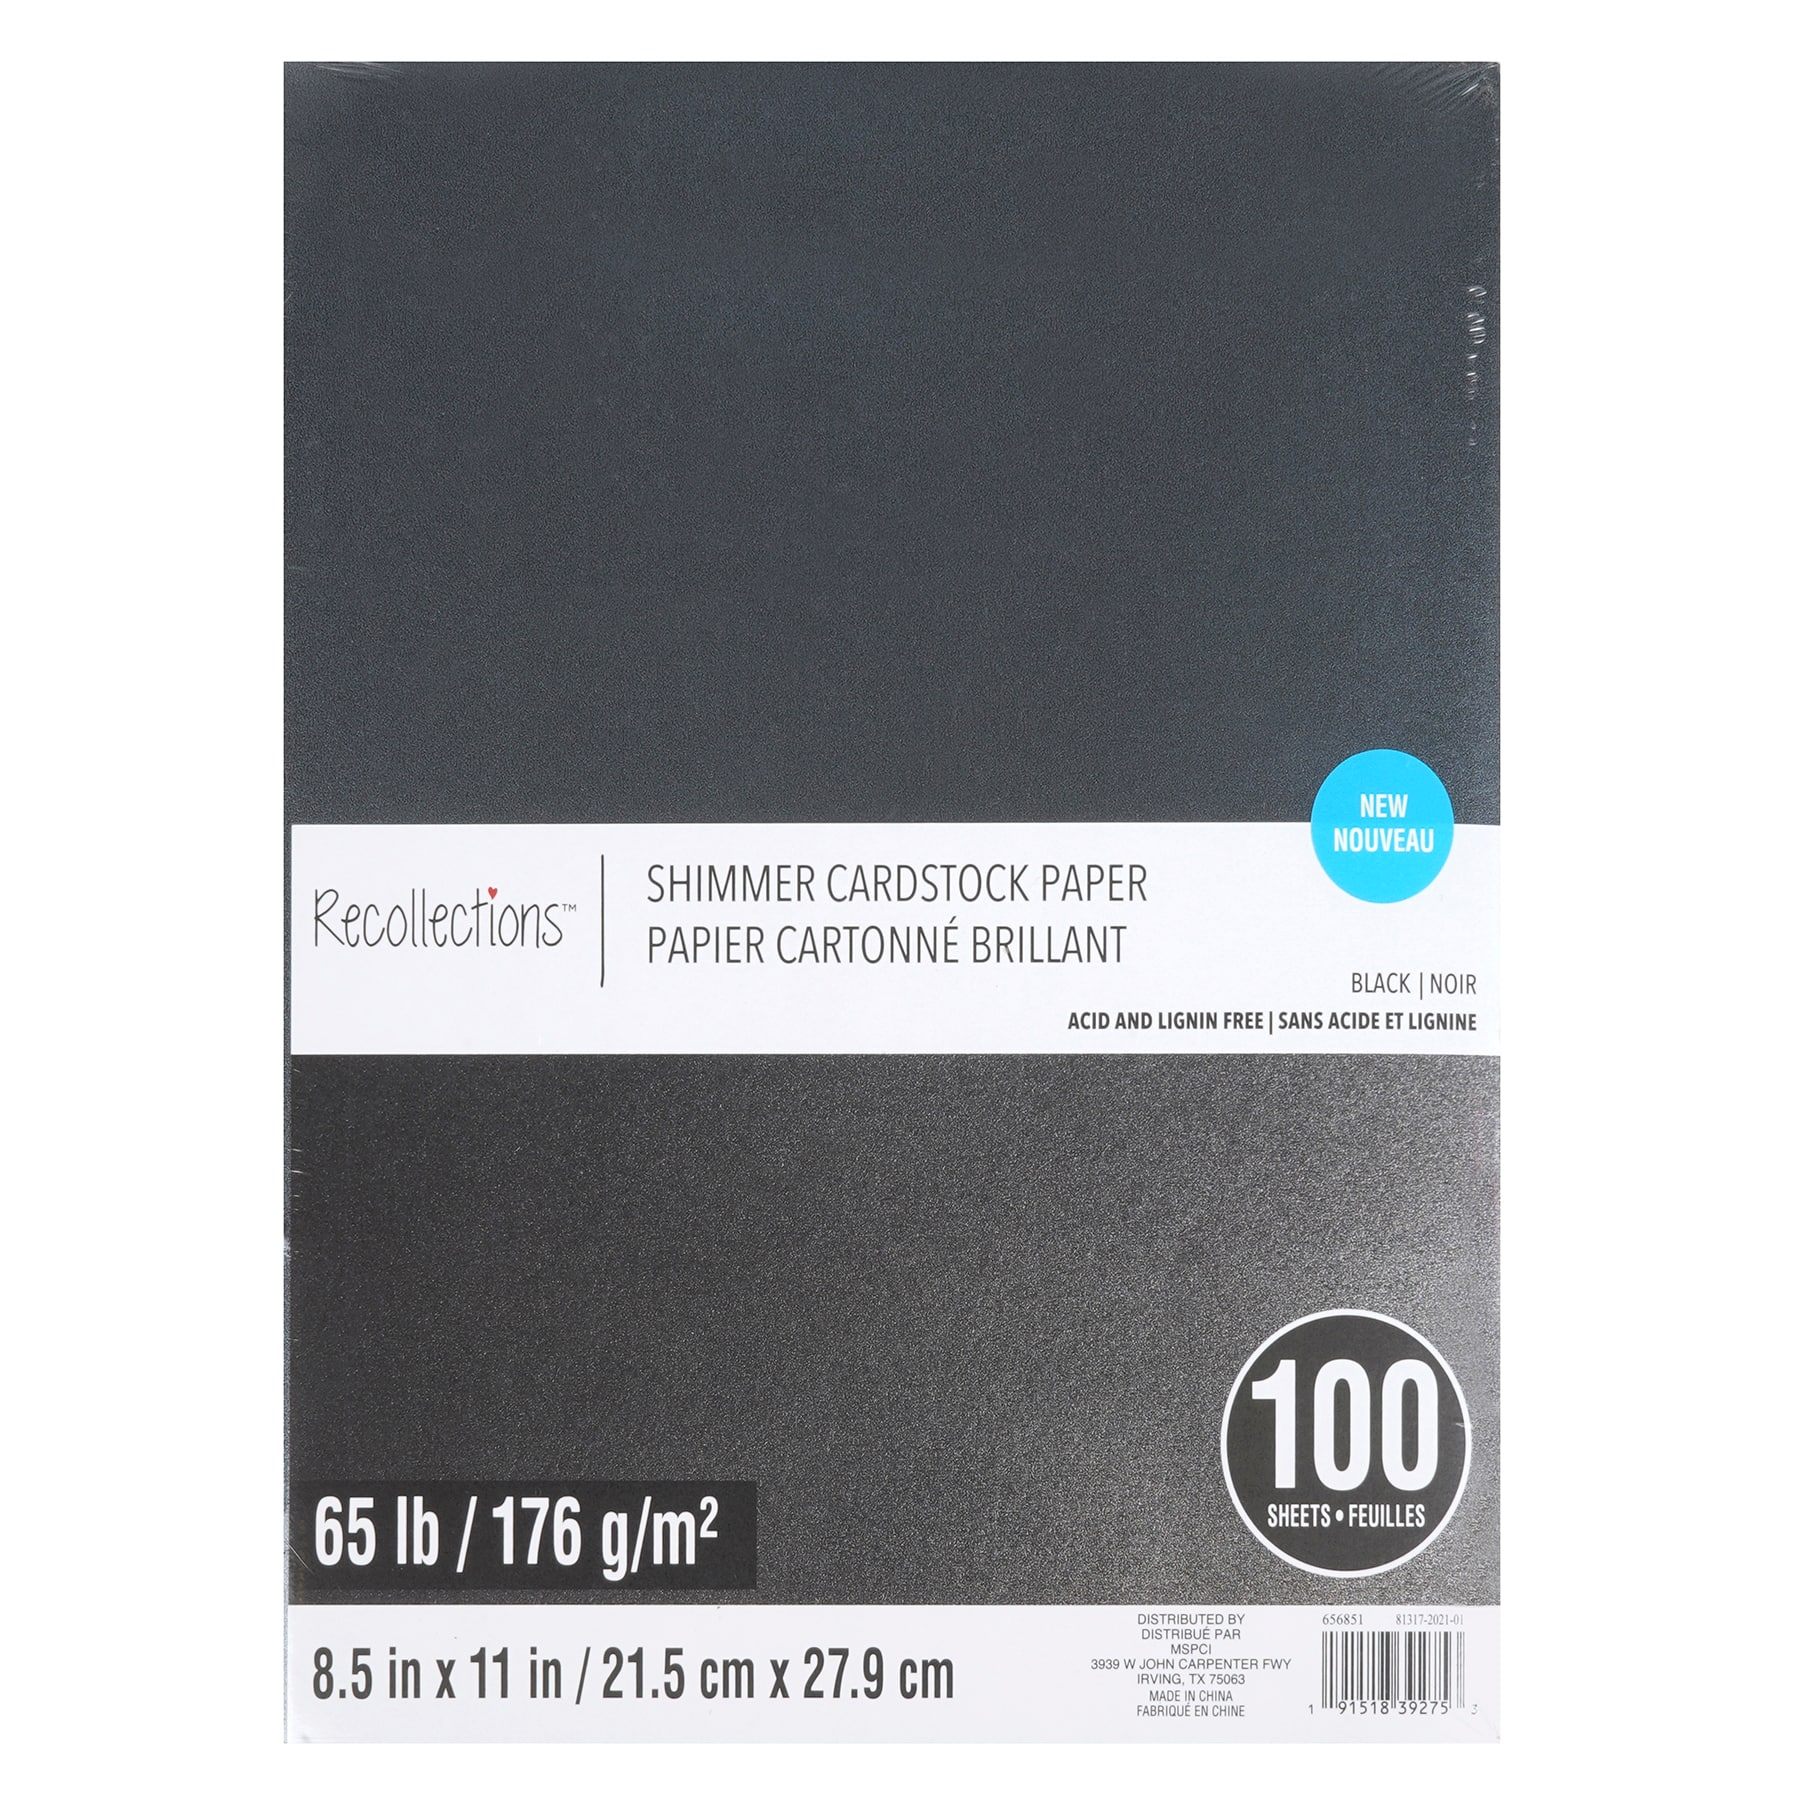  Silunkia 28 Sheets Black Cardstock Paper 8.5 x 11, 250gsm/92lb  Thick Card Stock Construction Paper Great for Printing, Arts and Crafts,  DIY Cards, wedding invitations, Greeting cards, Office(Black)